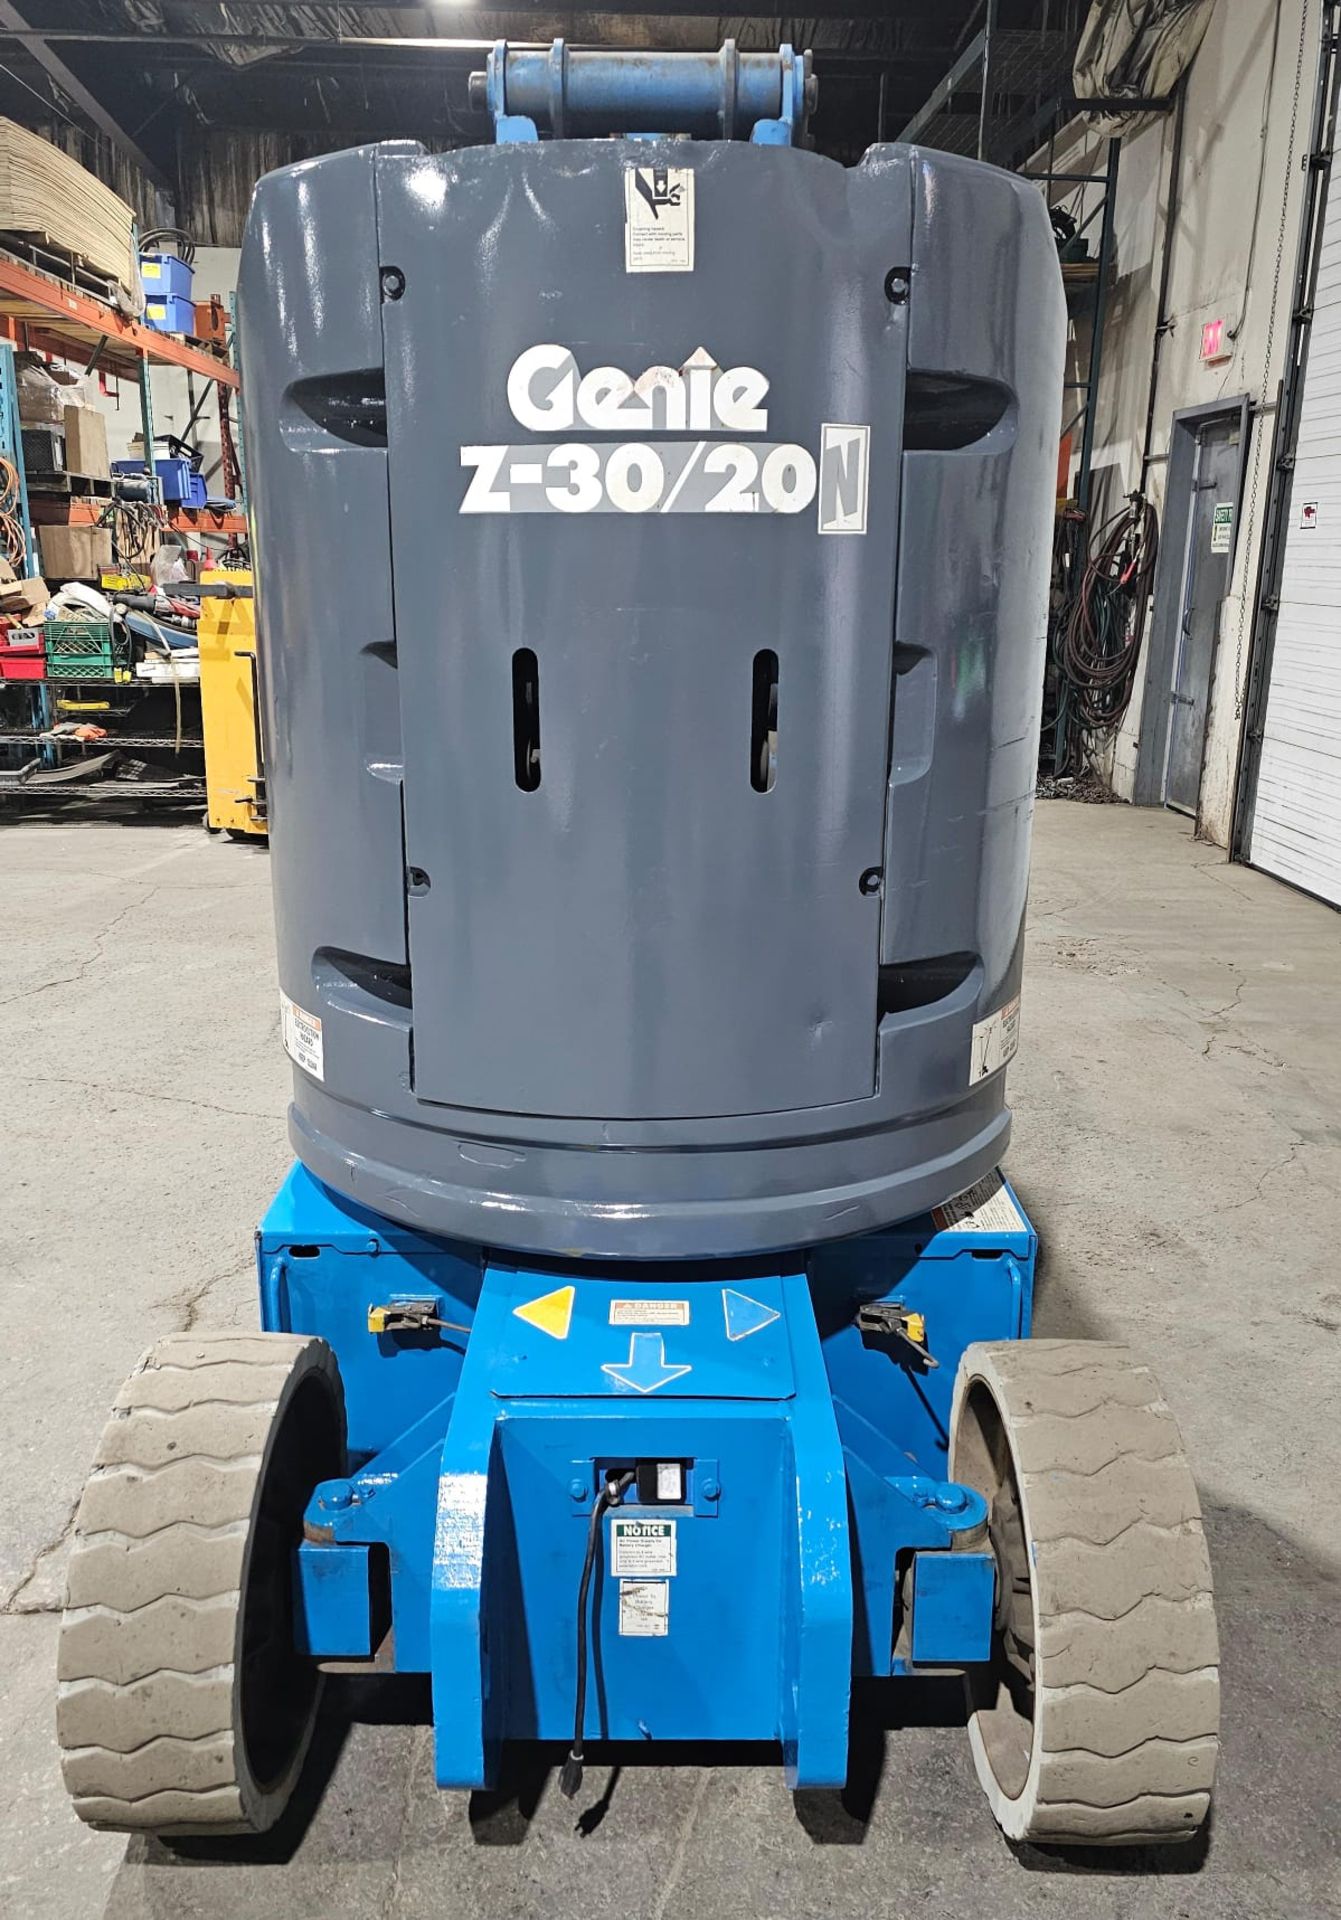 Genie model Z-30-N Zoom Boom Electric Motorized Man Lift 30' Height & 21' Reach - with 24V Battery - Image 8 of 10